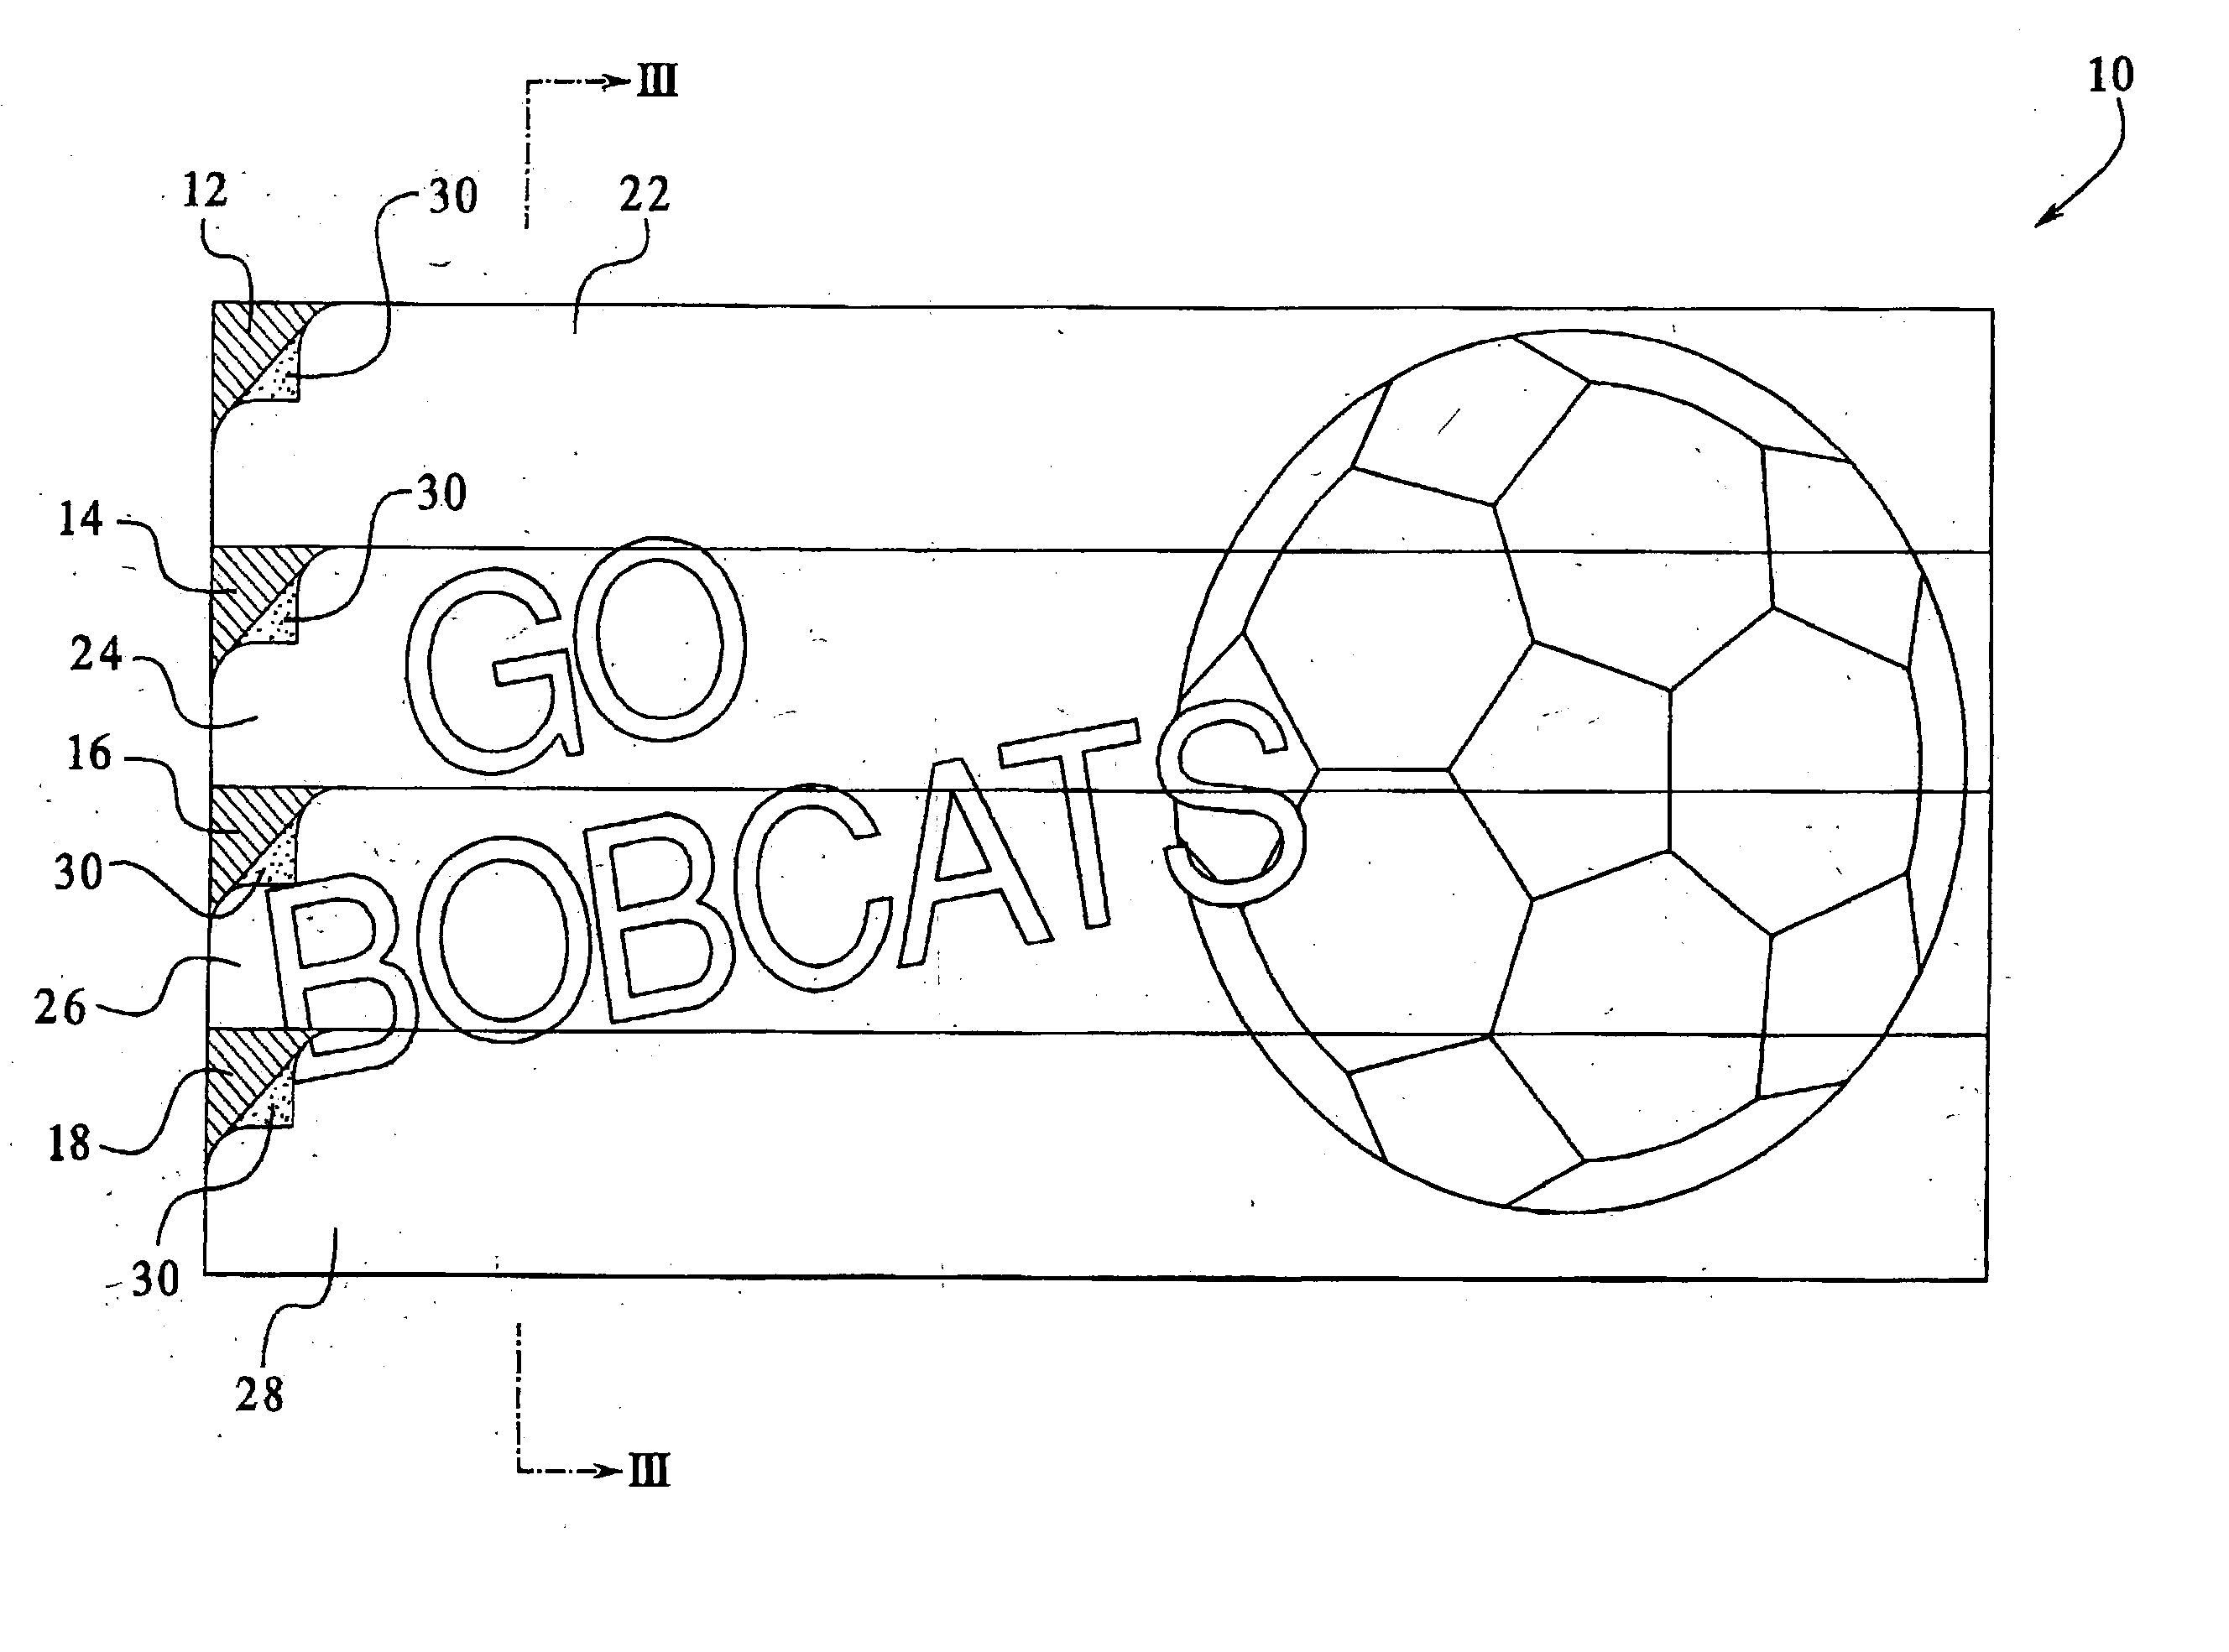 Magnetic image assembly to mount on garage door panels and a system and a method for decorating a garage door